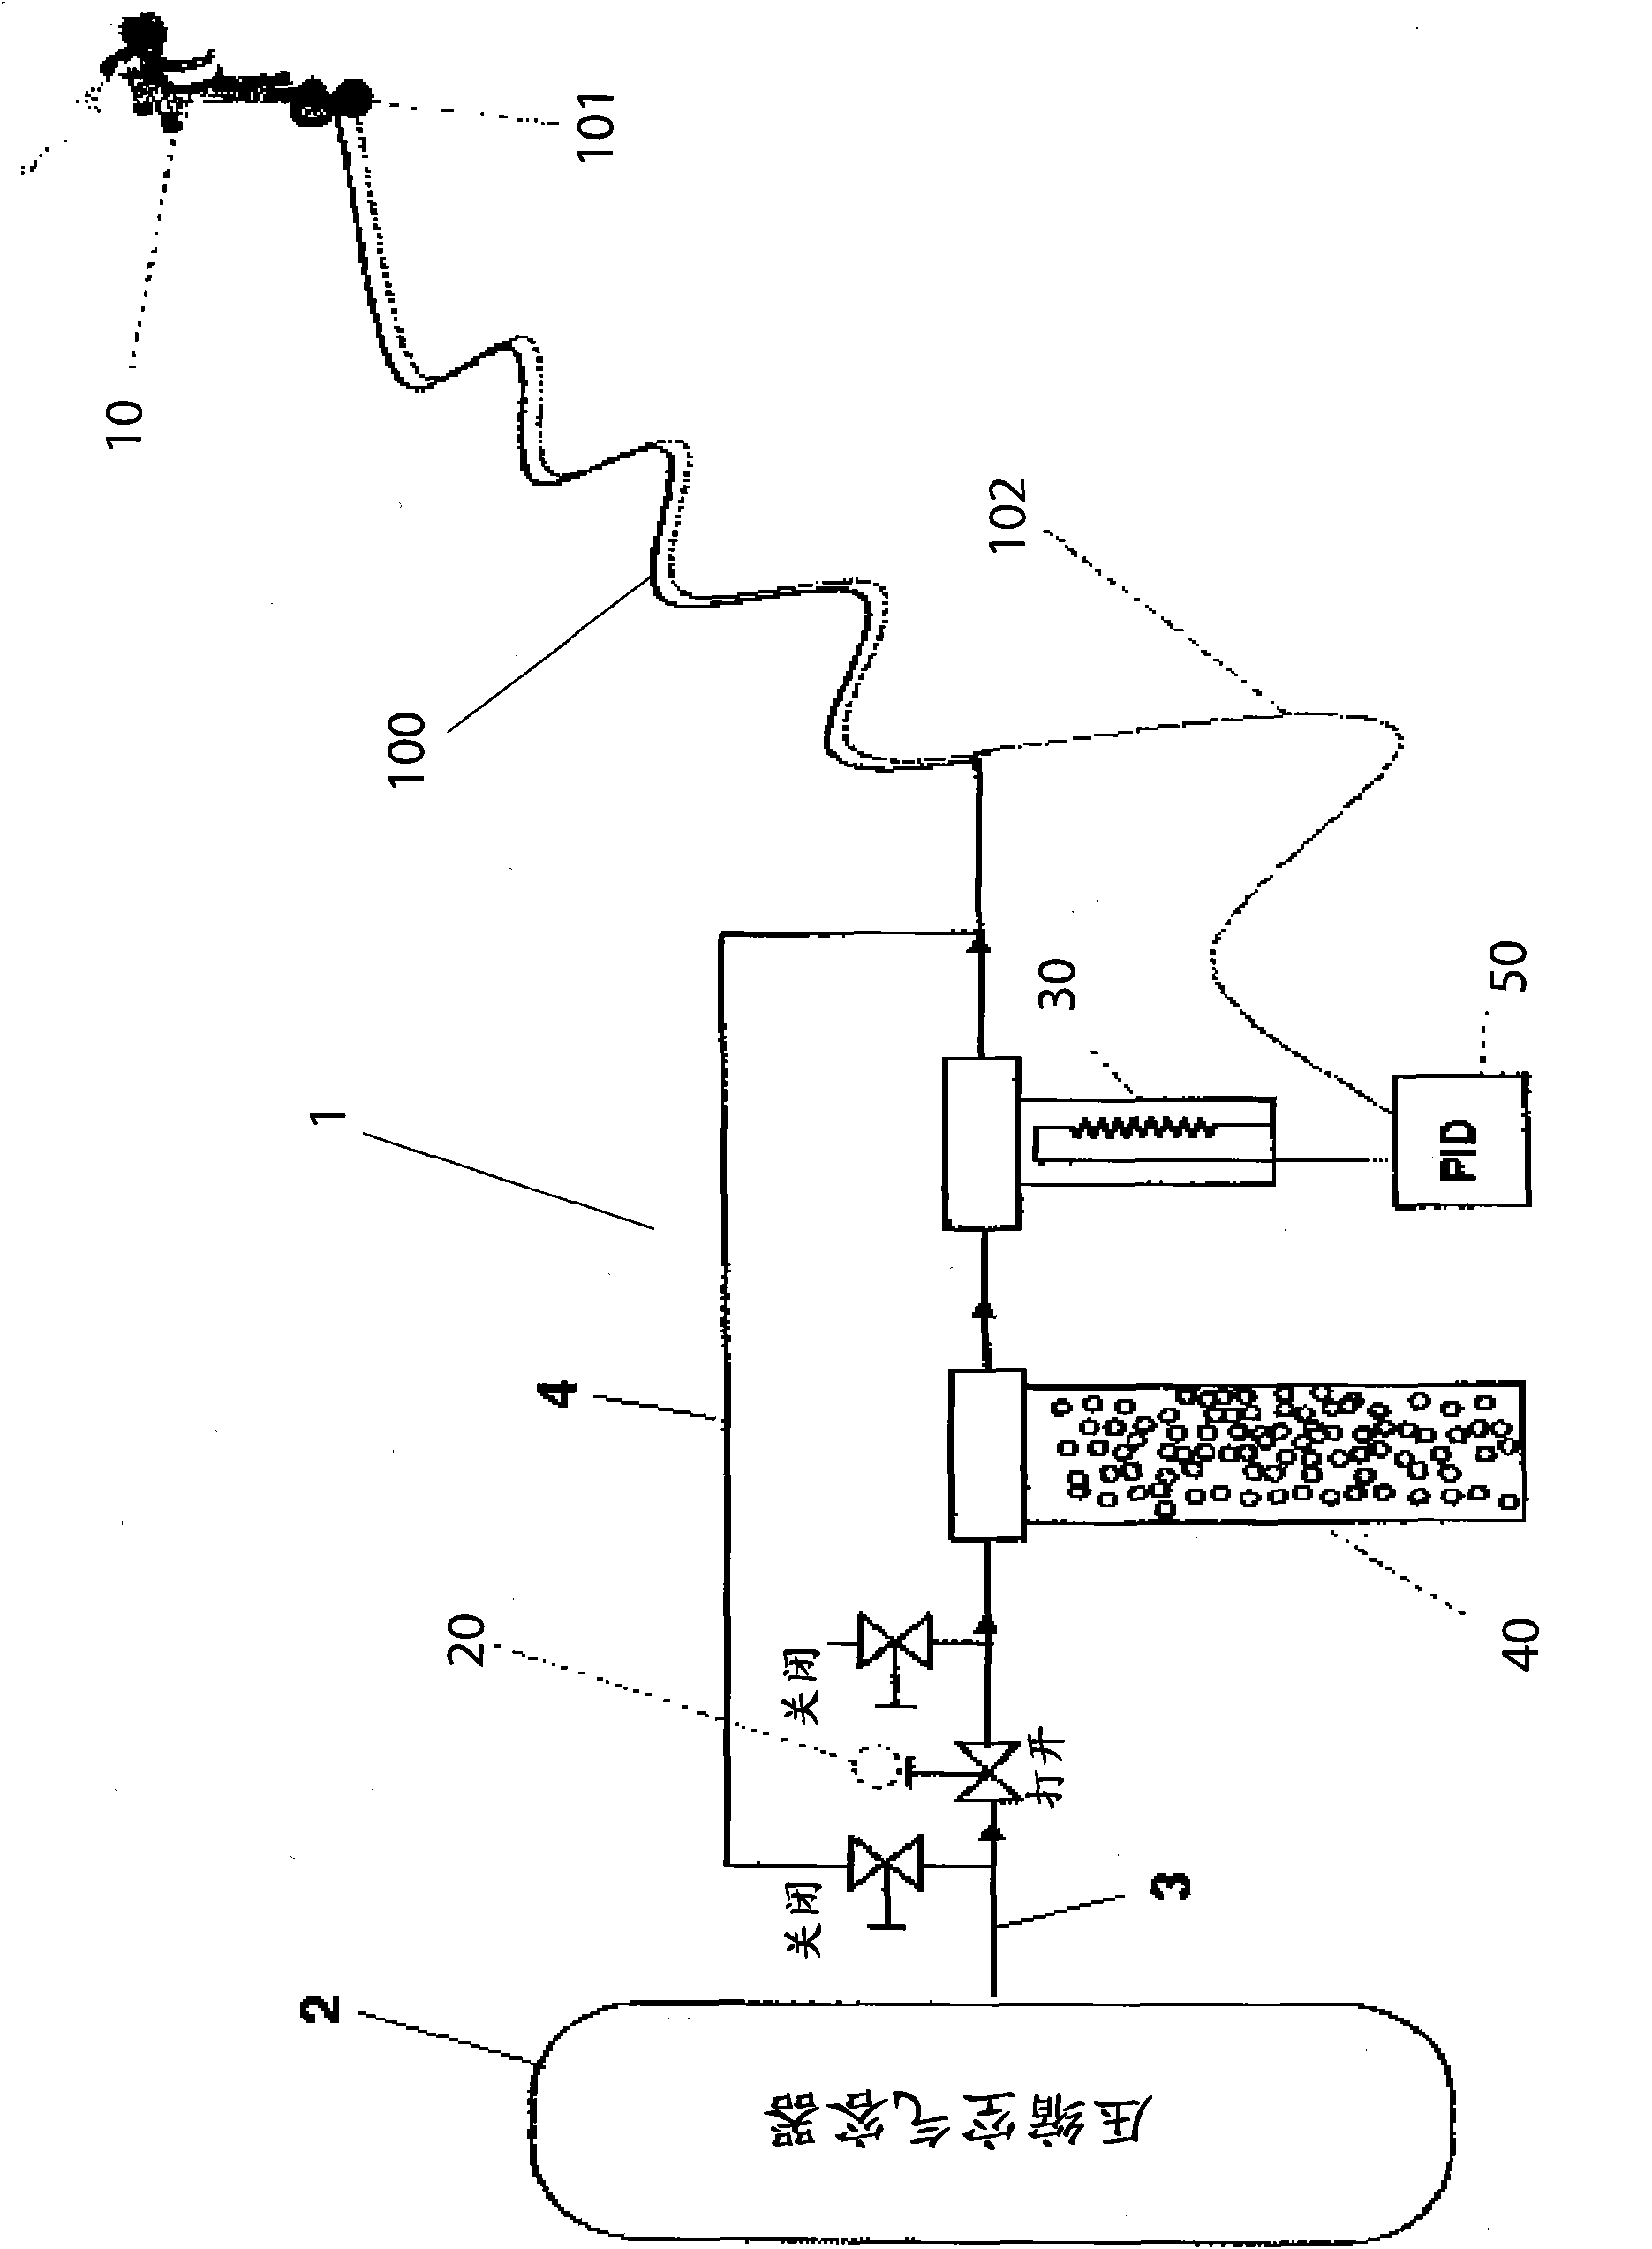 Pneumatic painting apparatus with spray gun, heater device, and dehumidifier/drier device